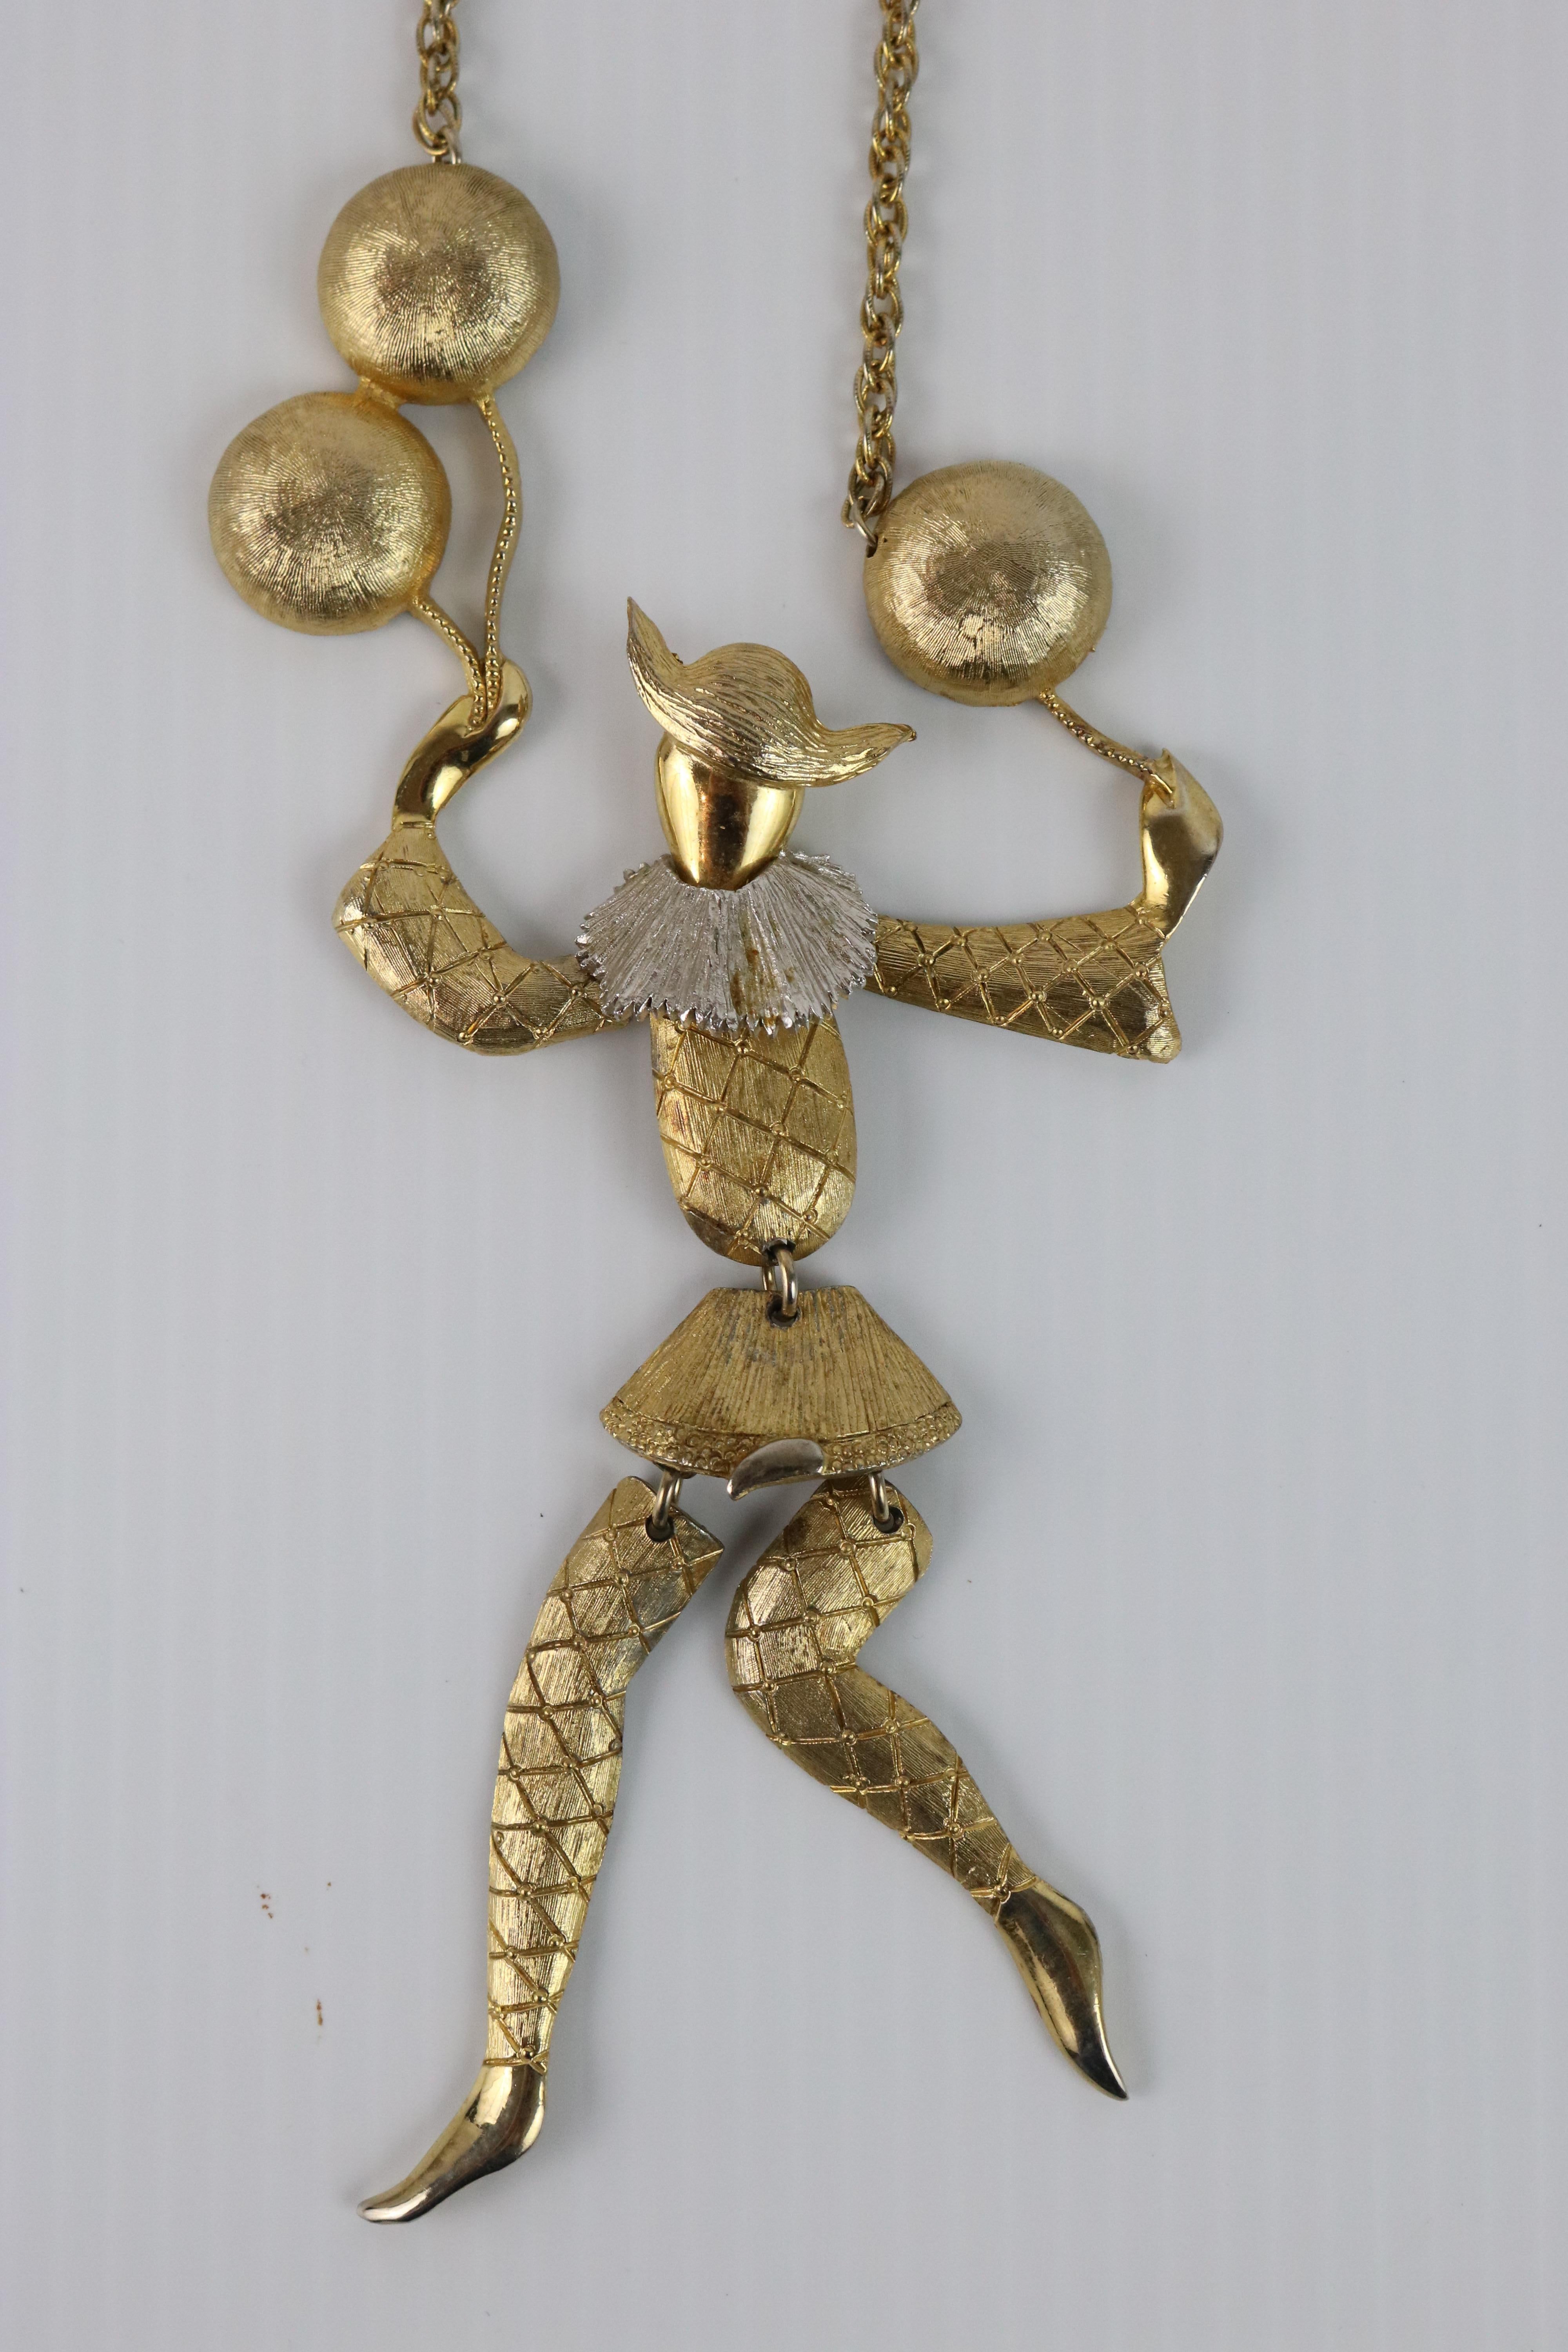 An Adorable Fun Piece to Show-off!
Vintage Romantic Sensuous Gold Plate Articulated Harlequin Figure Floating on Balloons--
Hangs from a chain on the Neck in Articulated Movement as You Move. circa 1960
Hallmark- Polcini  

Polcini Jewelry is a